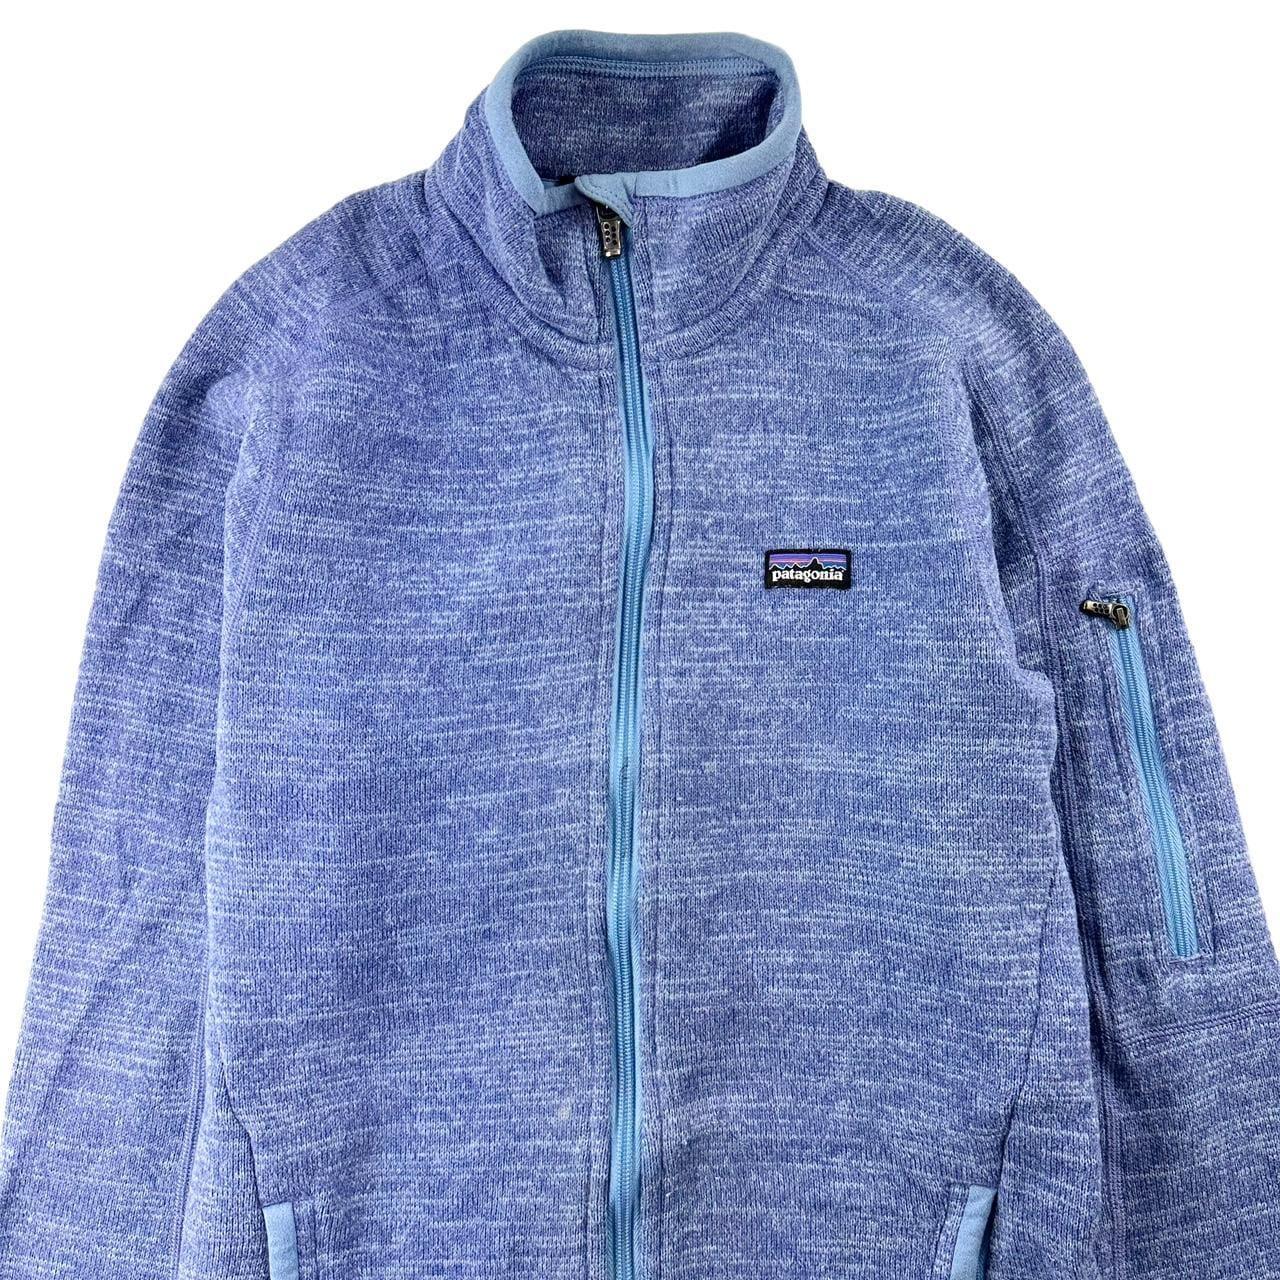 Patagonia zip jumper woman’s size XS - Known Source